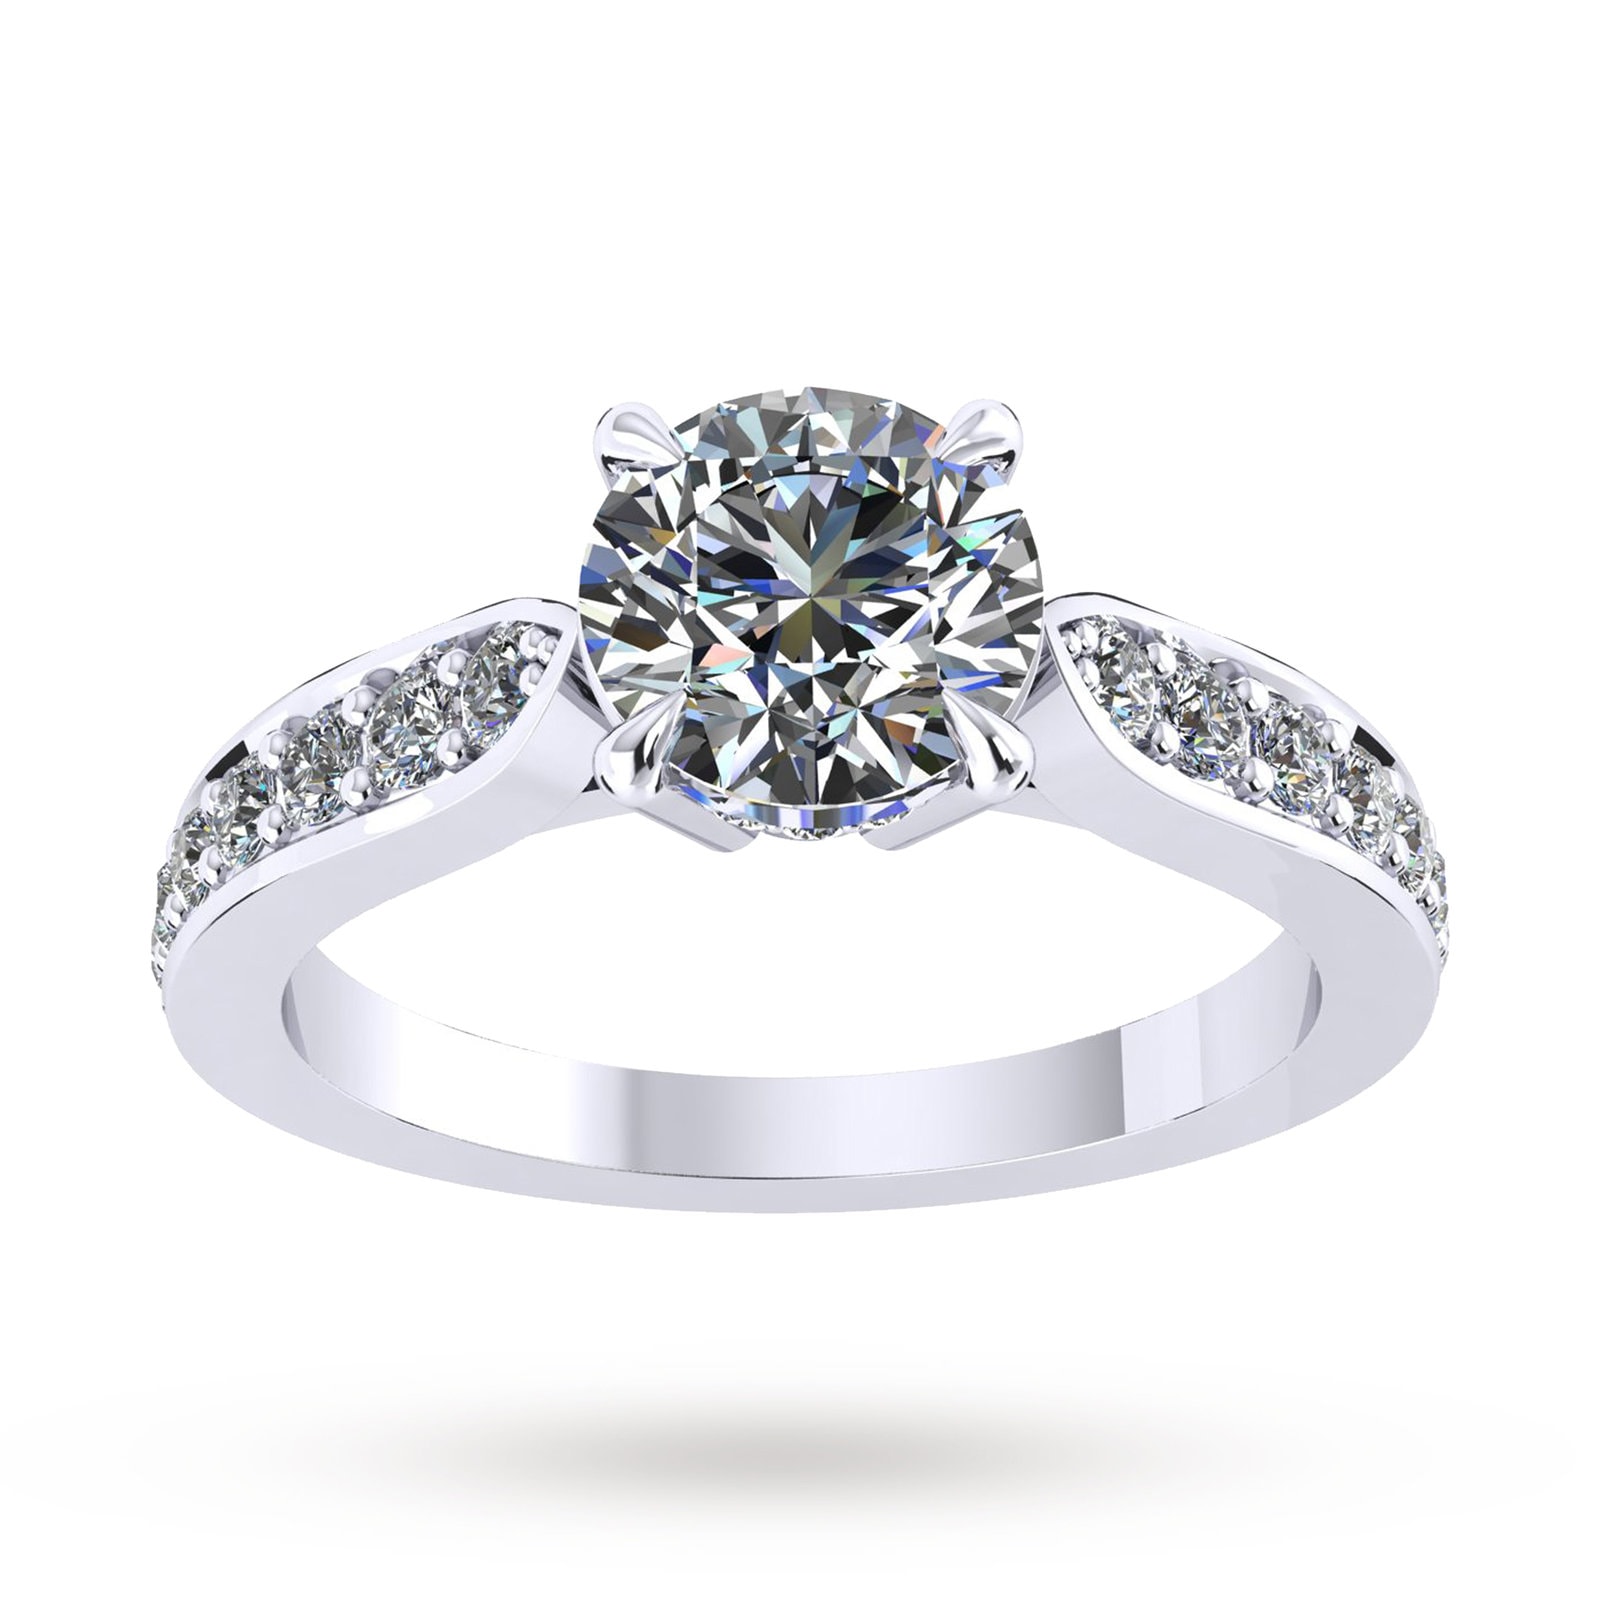 Boscobel Engagement Ring With Diamond Band 0.42 Carat Total Weight - Ring Size O